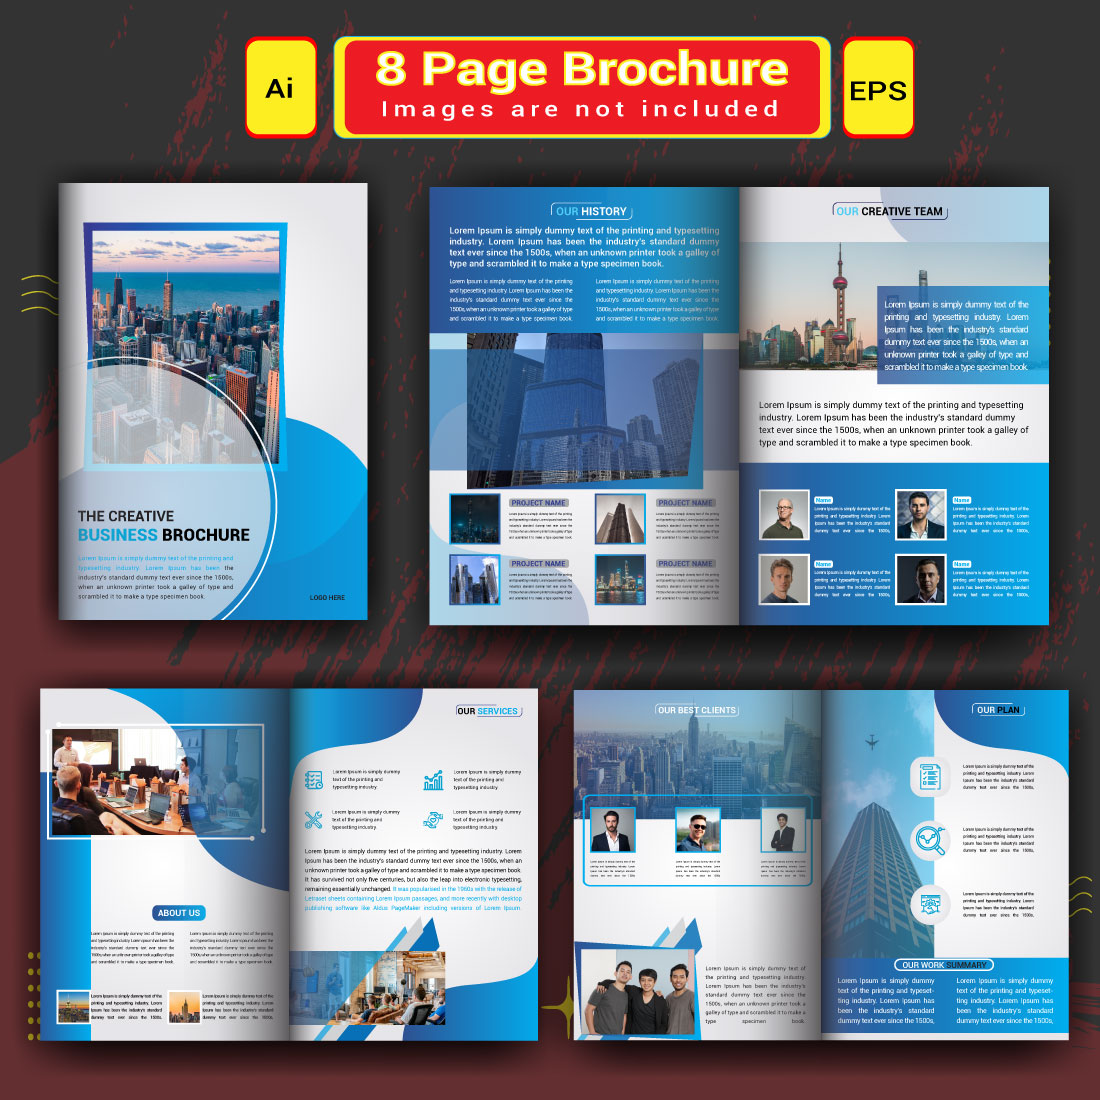 8 Page Business Profile Brochure Template Design cover image.